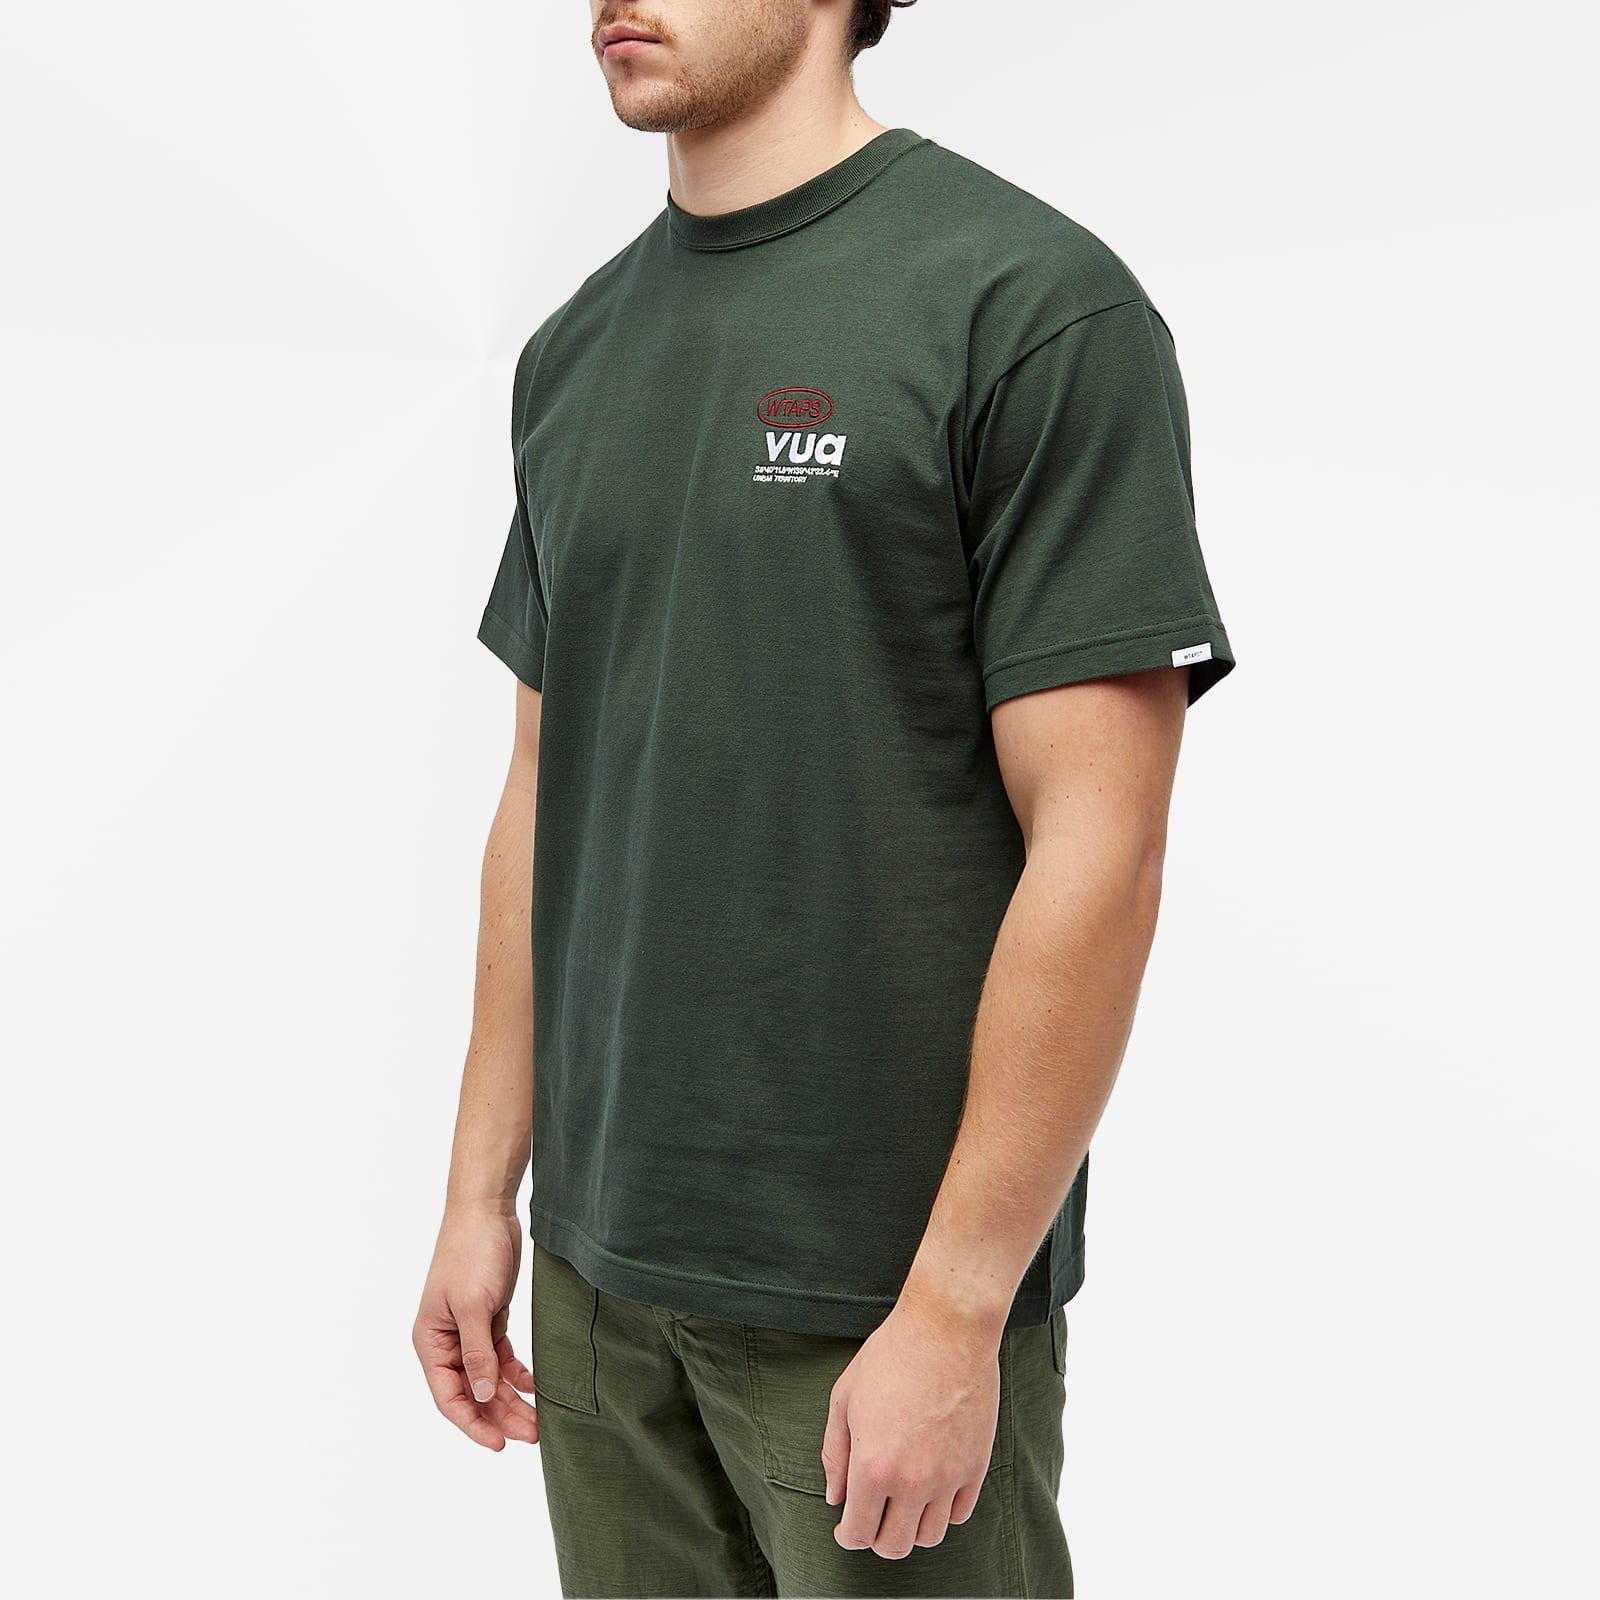 WTAPS 04 Embroided Crew Neck T-Shirt - 2